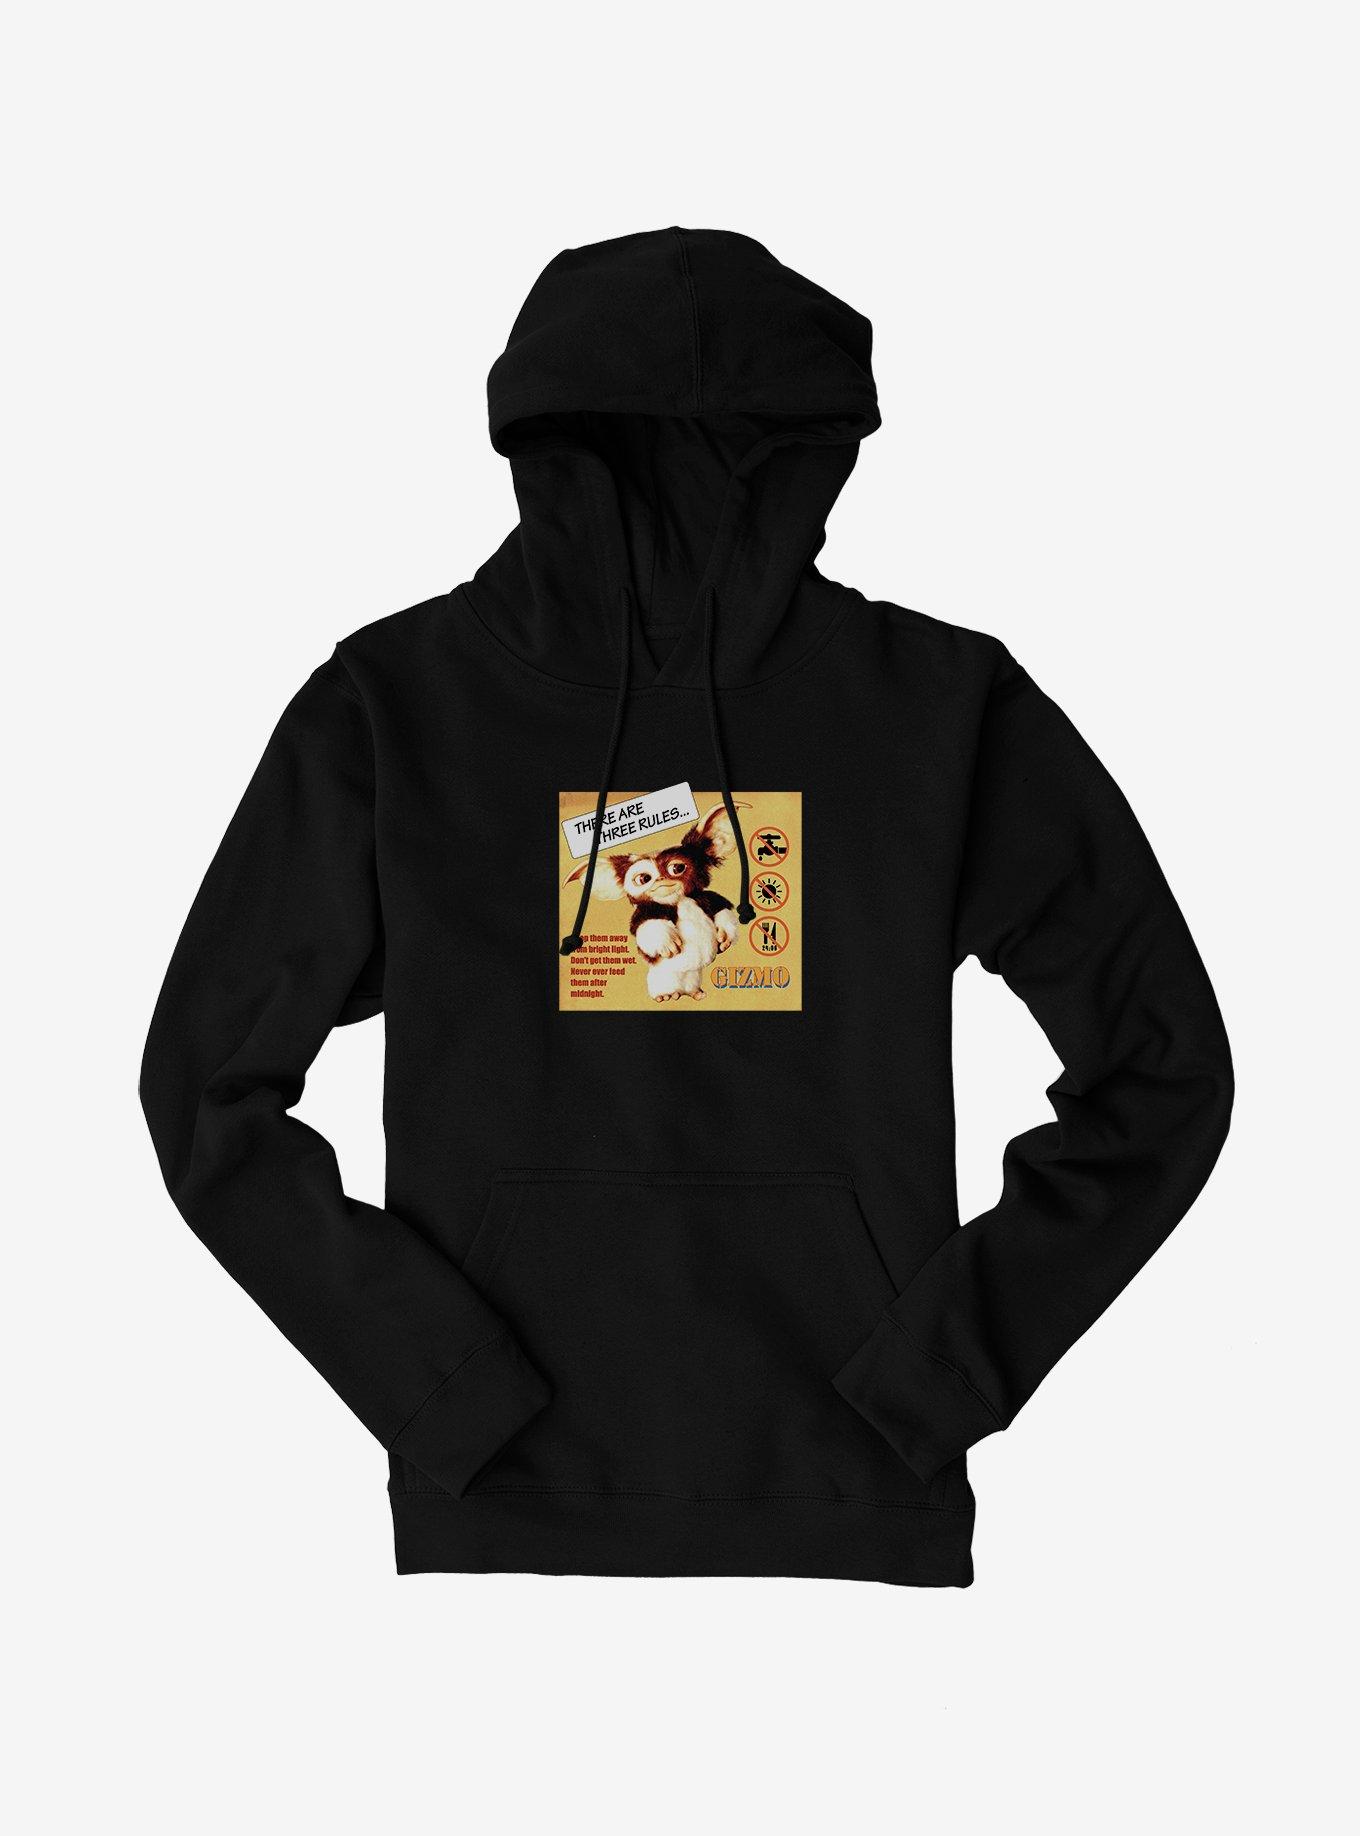 Gremlins There Are Three Rules... Hoodie, BLACK, hi-res